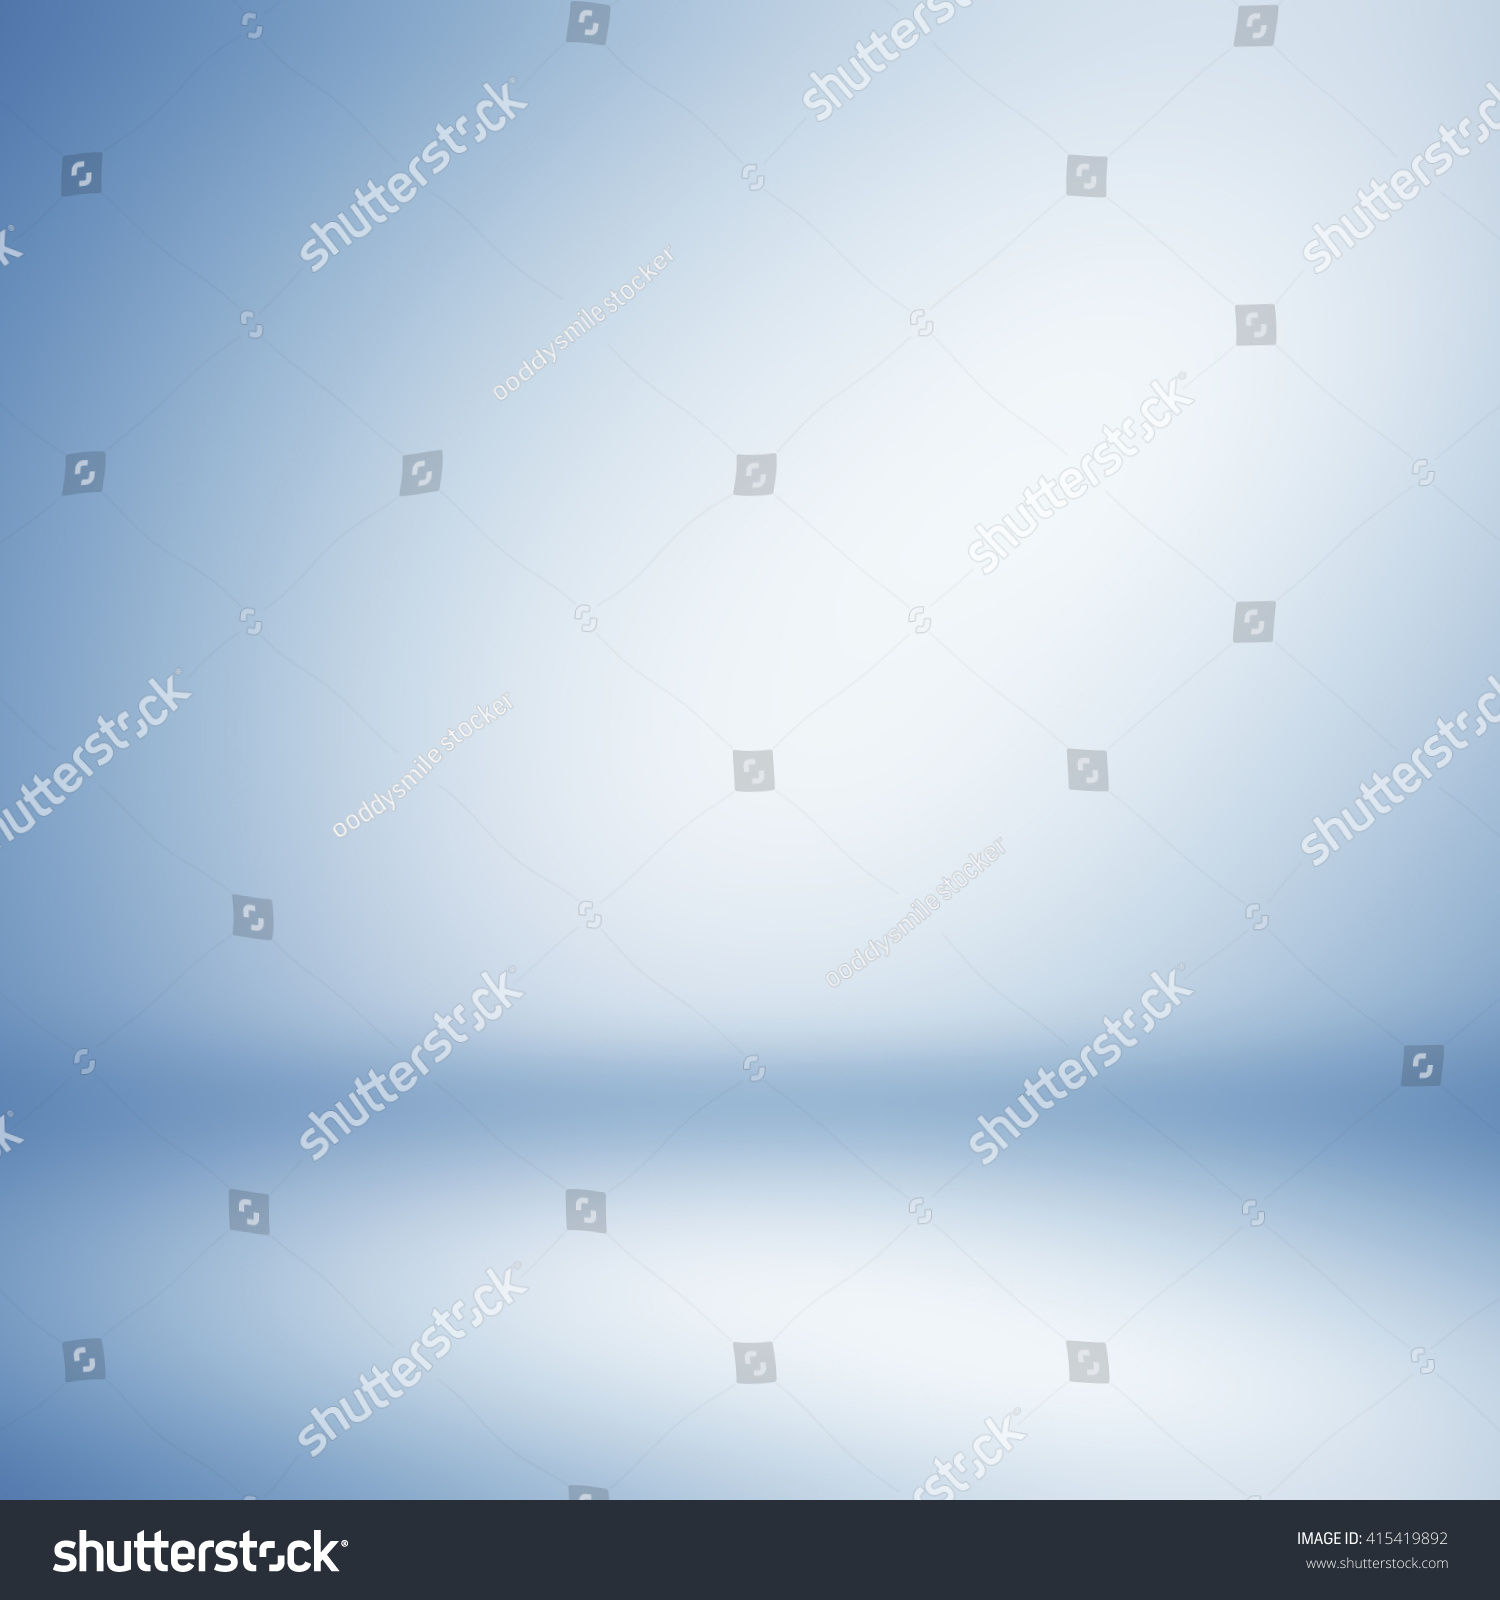 Abstract illustration background texture of beauty dark and light clear grey, gradient flat wall and floor in empty spacious room #415419892